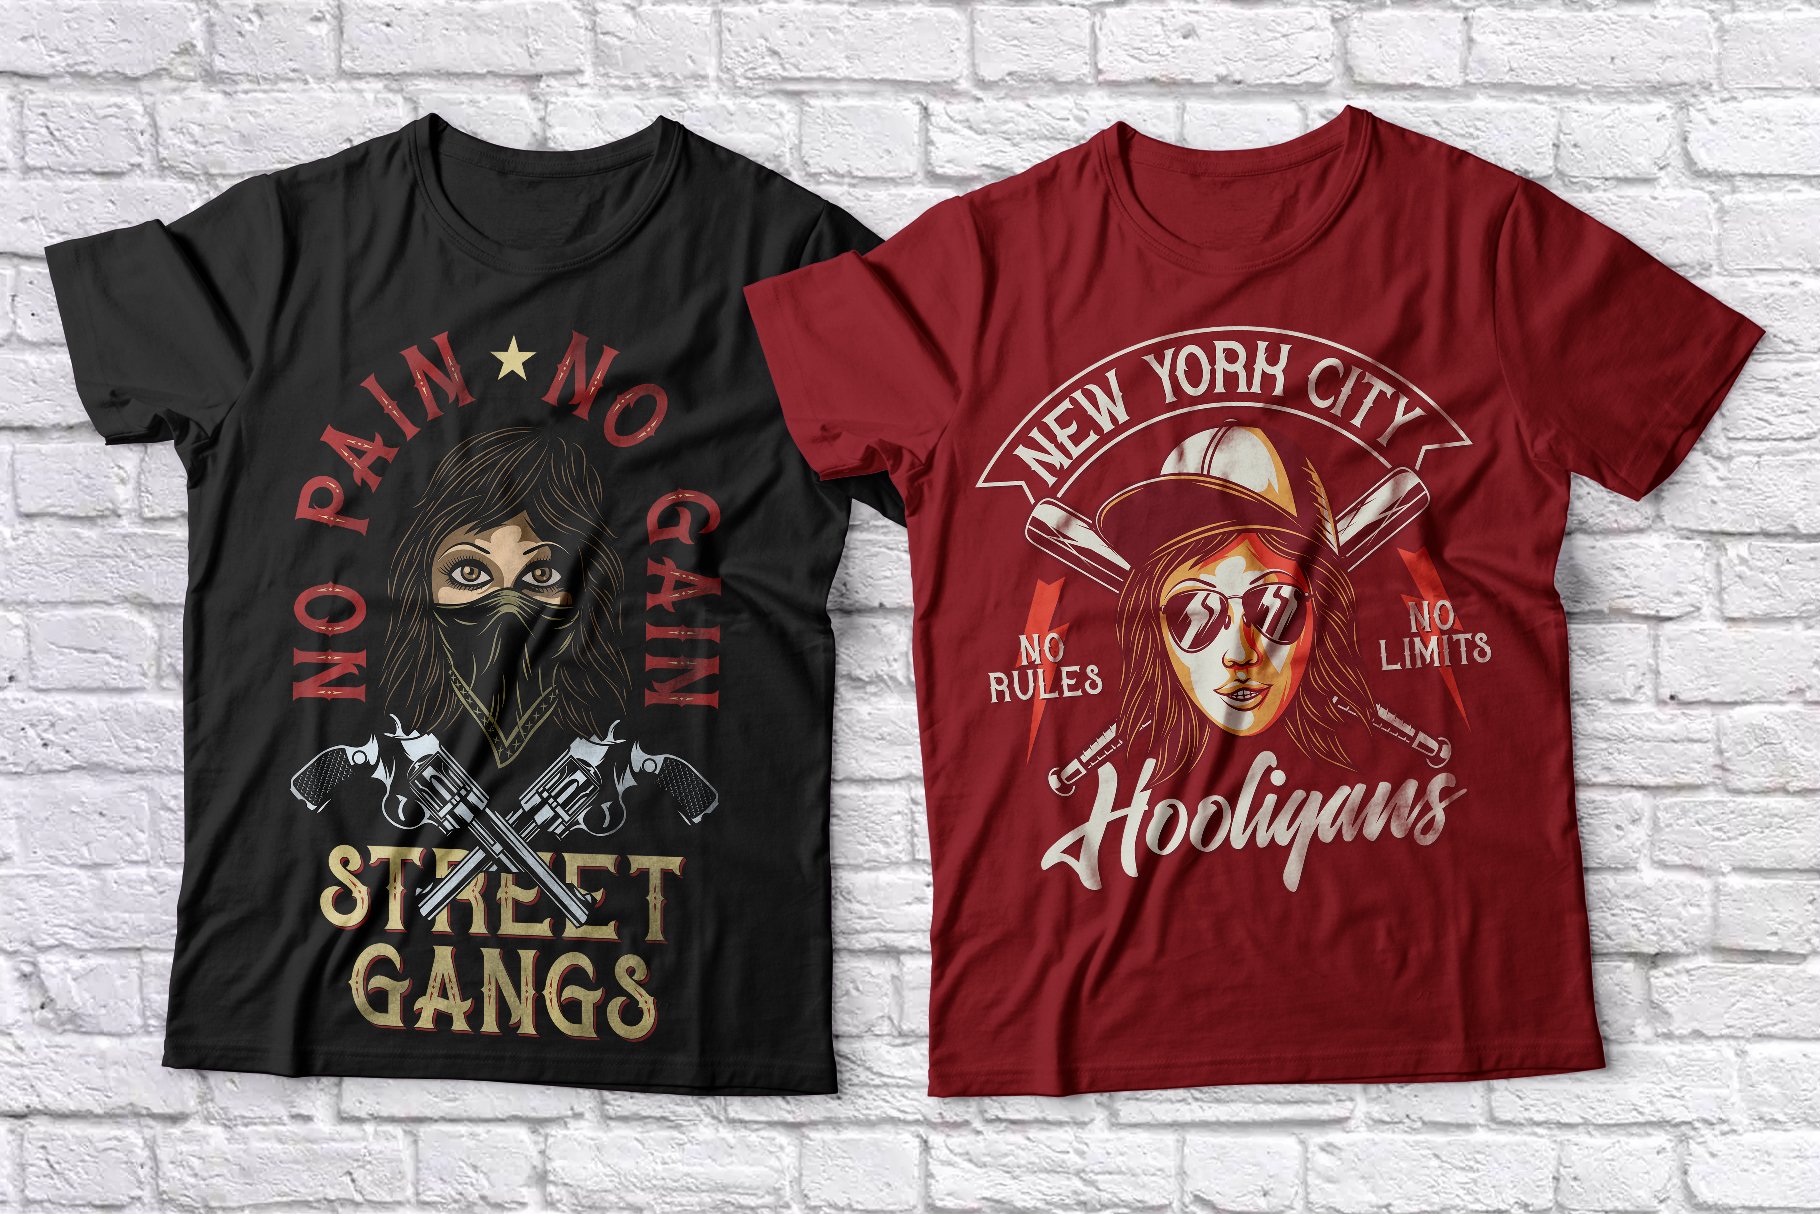 Red and black T-shirts with colorful illustrations and appropriate typeface.